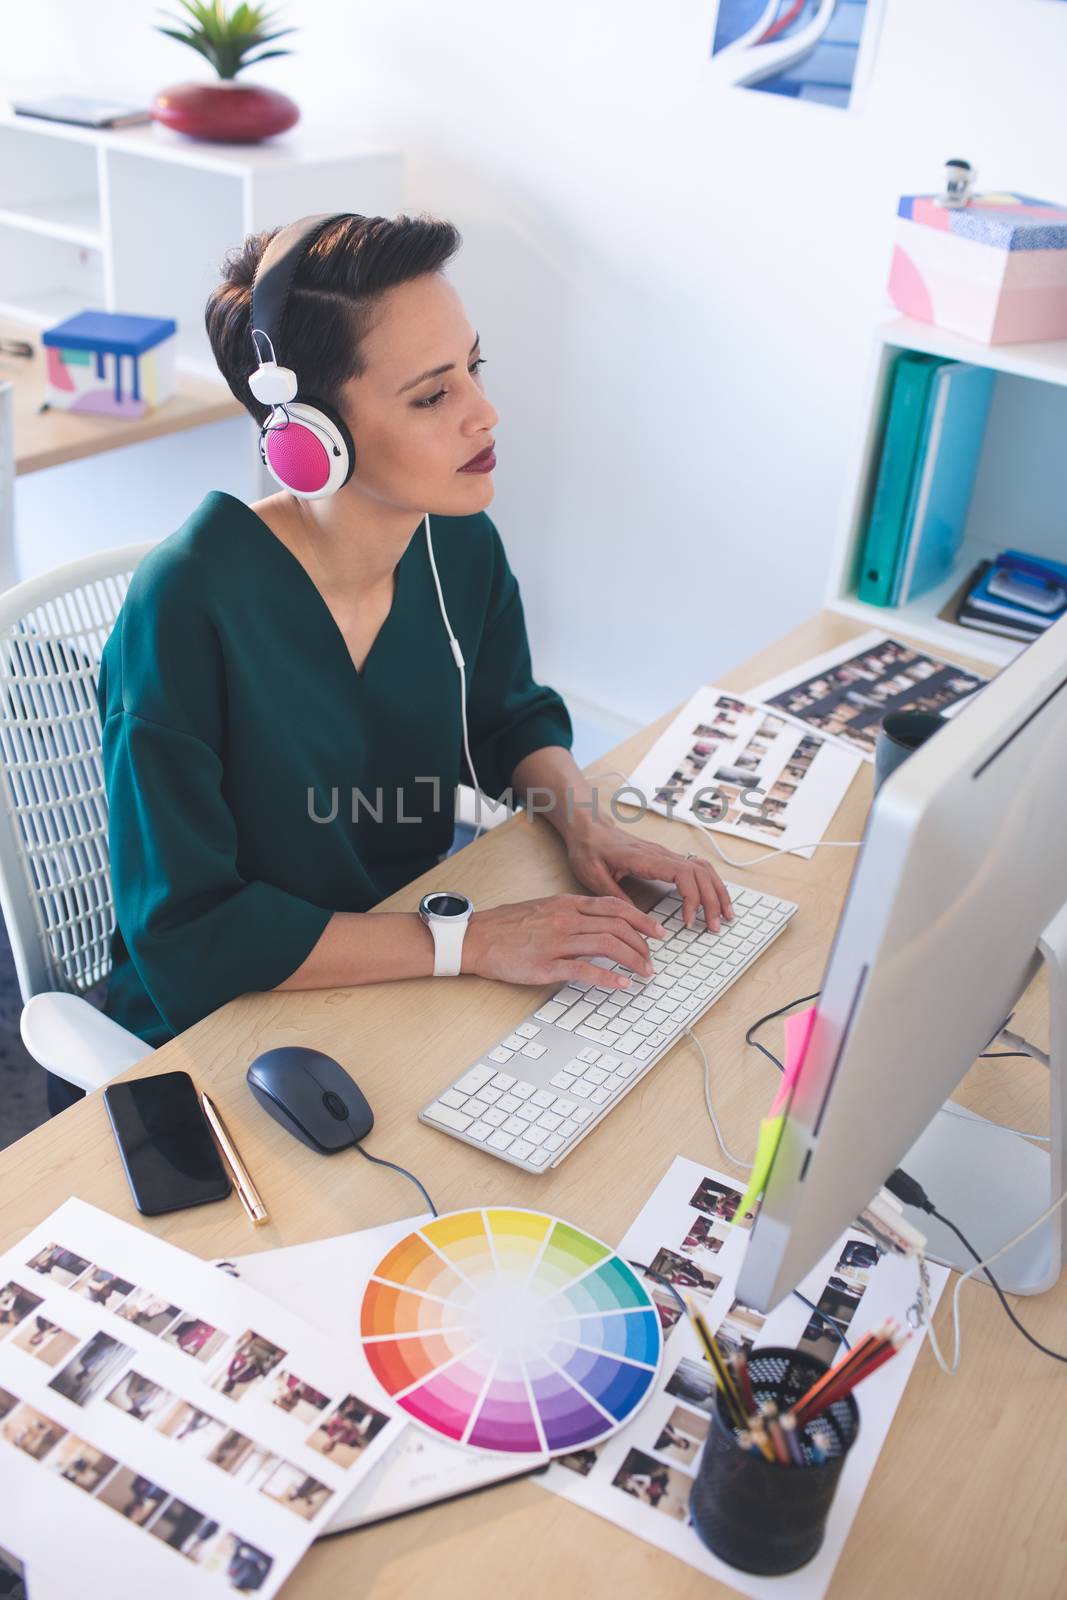 Female graphic designer working on computer at desk in the office